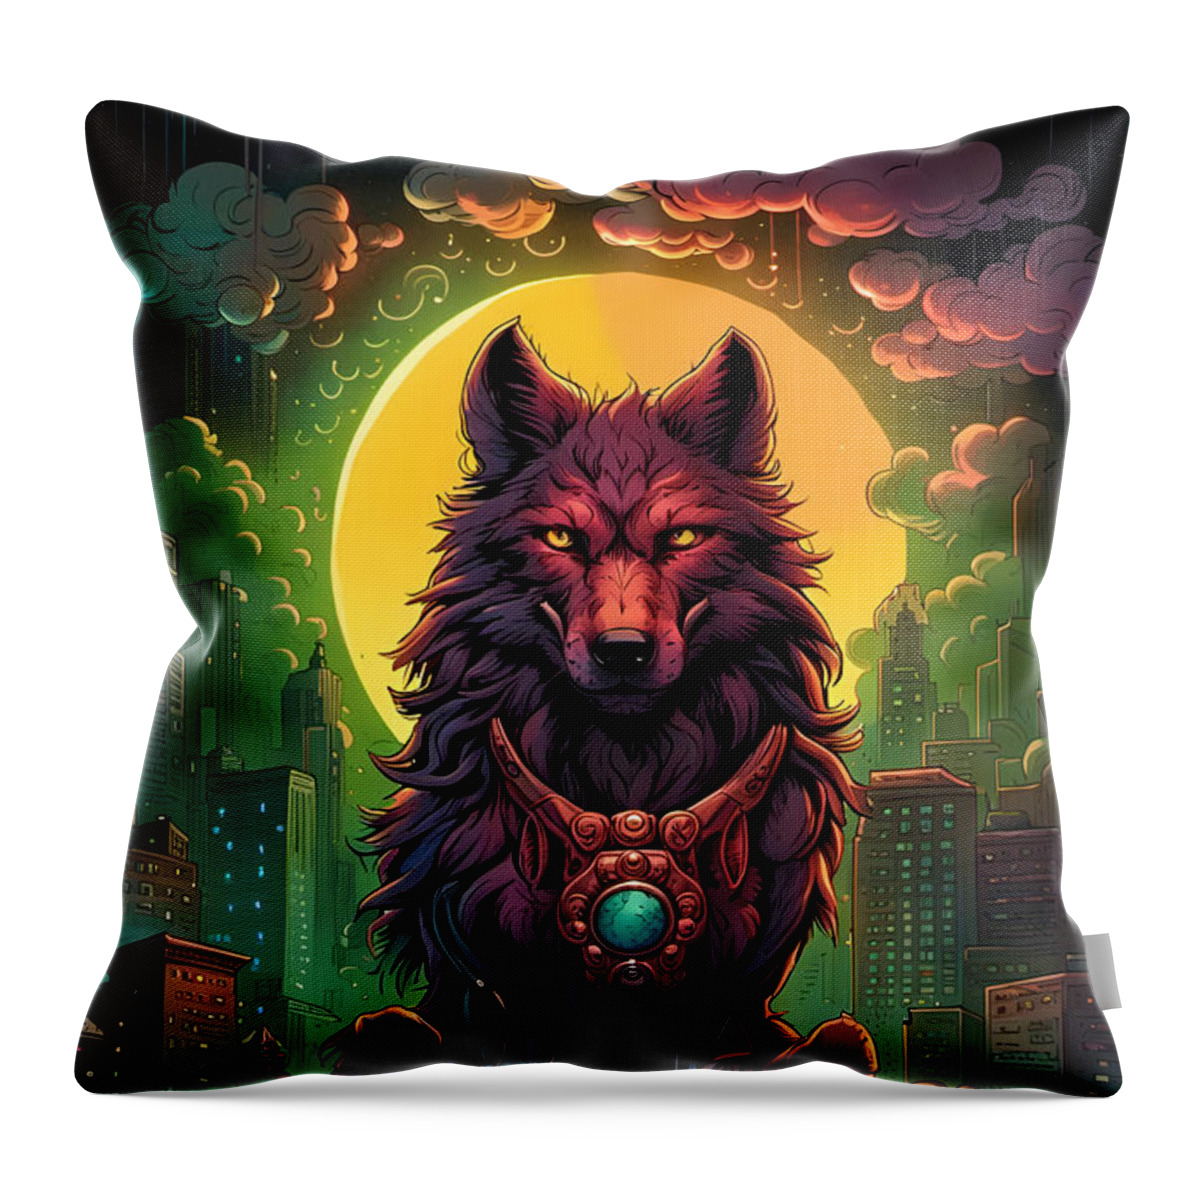 Voodoo Throw Pillow featuring the digital art Voodoo Wolf Under The Full Moon Of The City by Jason Denis